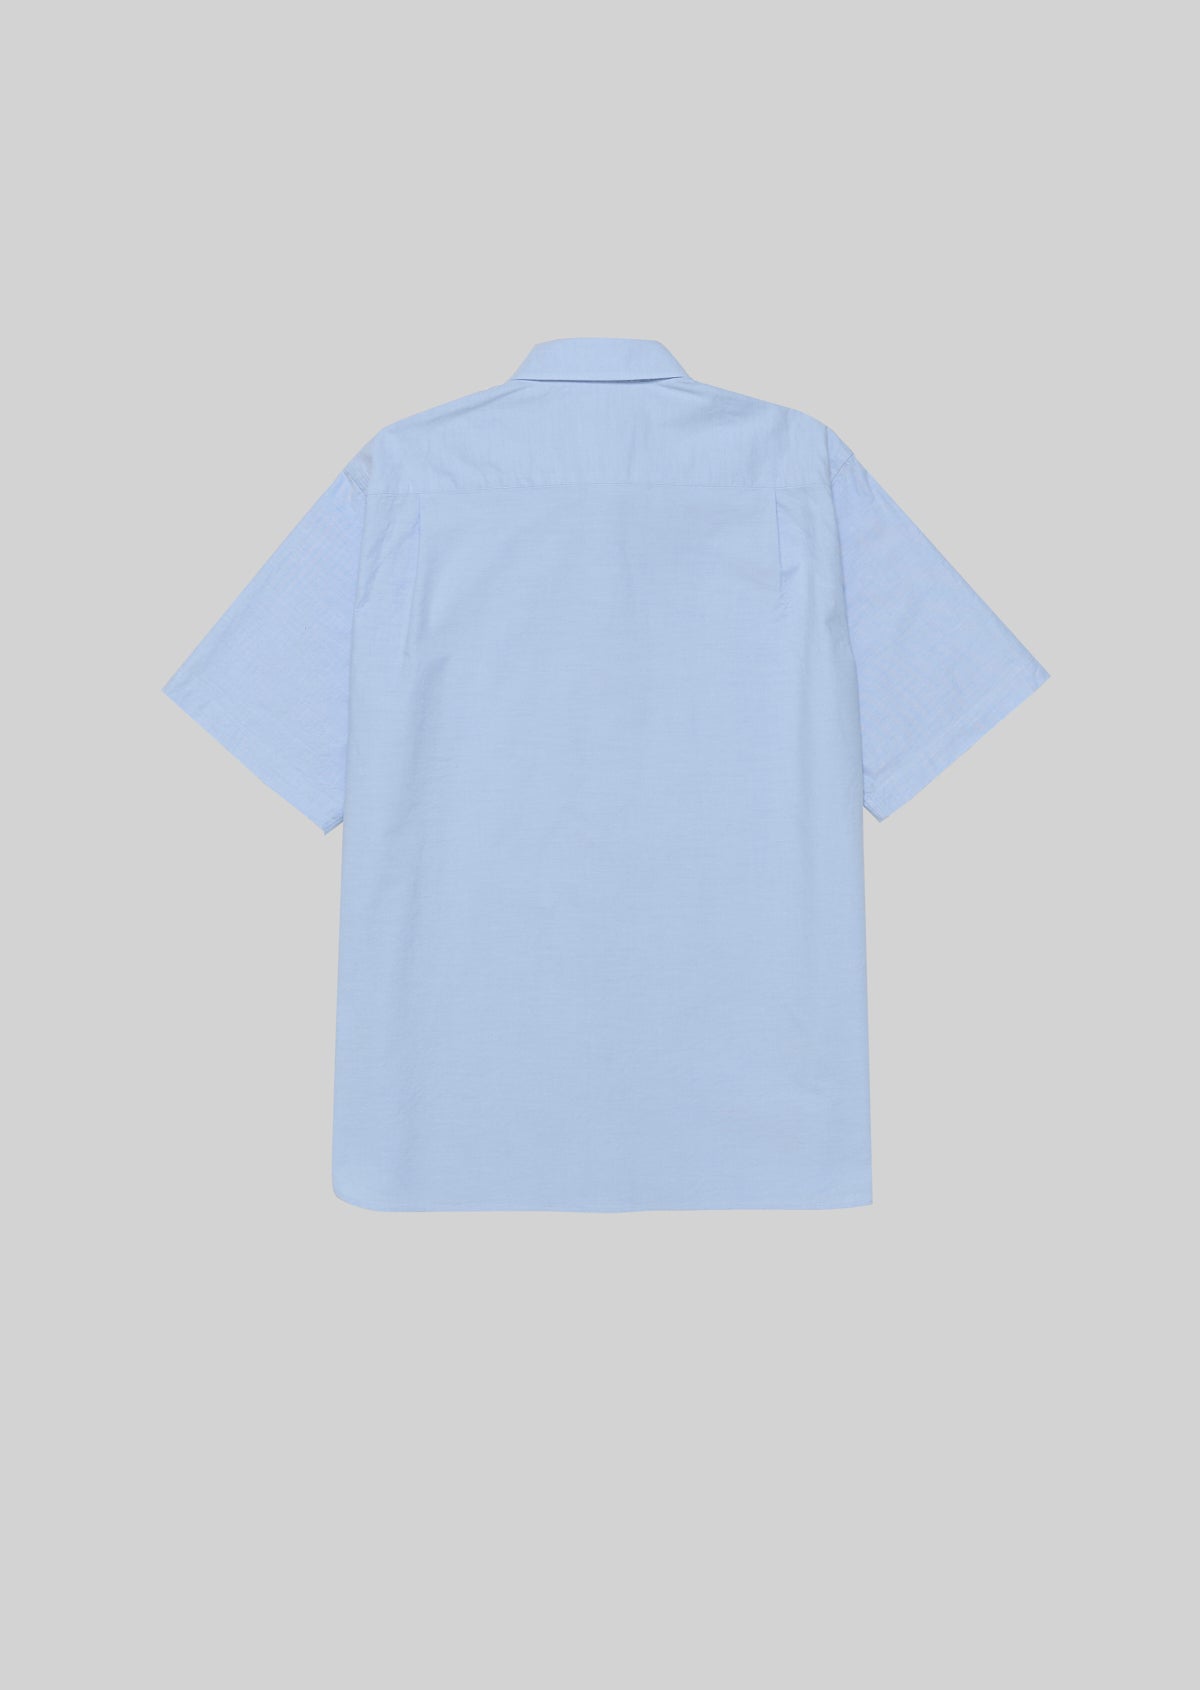 OX FORD BUTTON DOWN SHORT SLEEVE SHIRTS BLUE　8031-1603